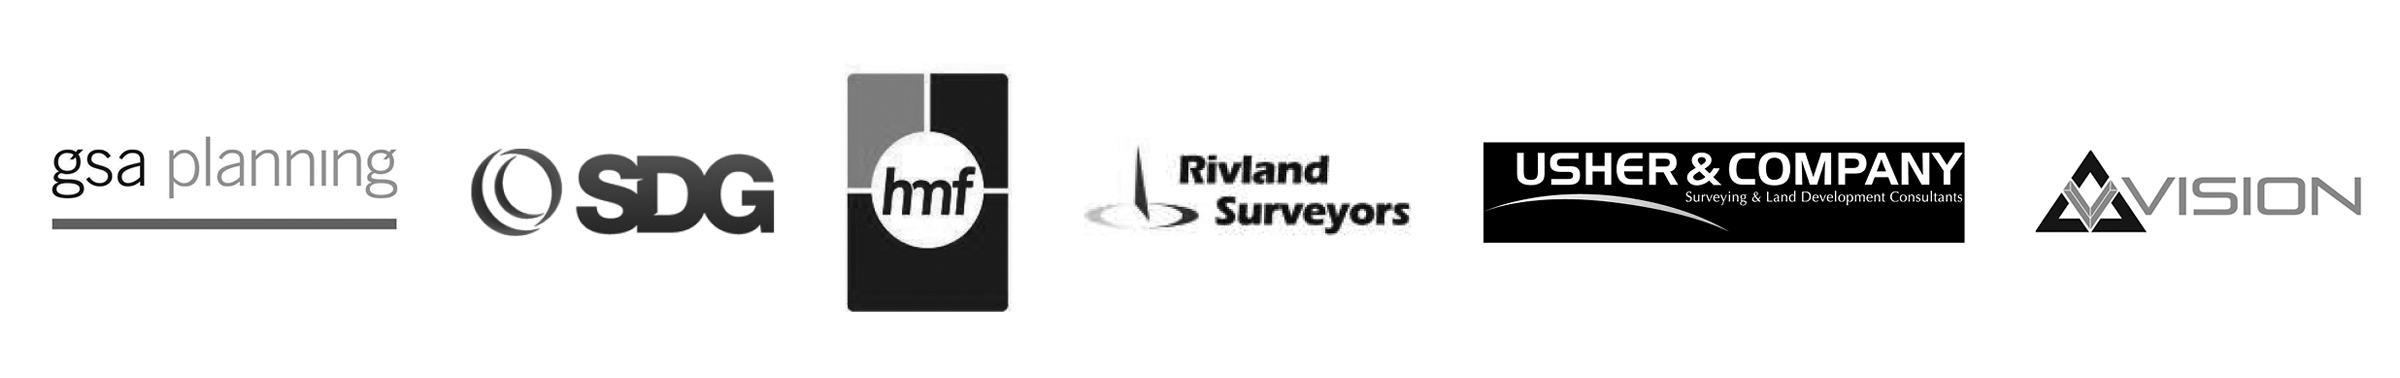 Land Surveyors + Planners logo for Review website page - AU2-1